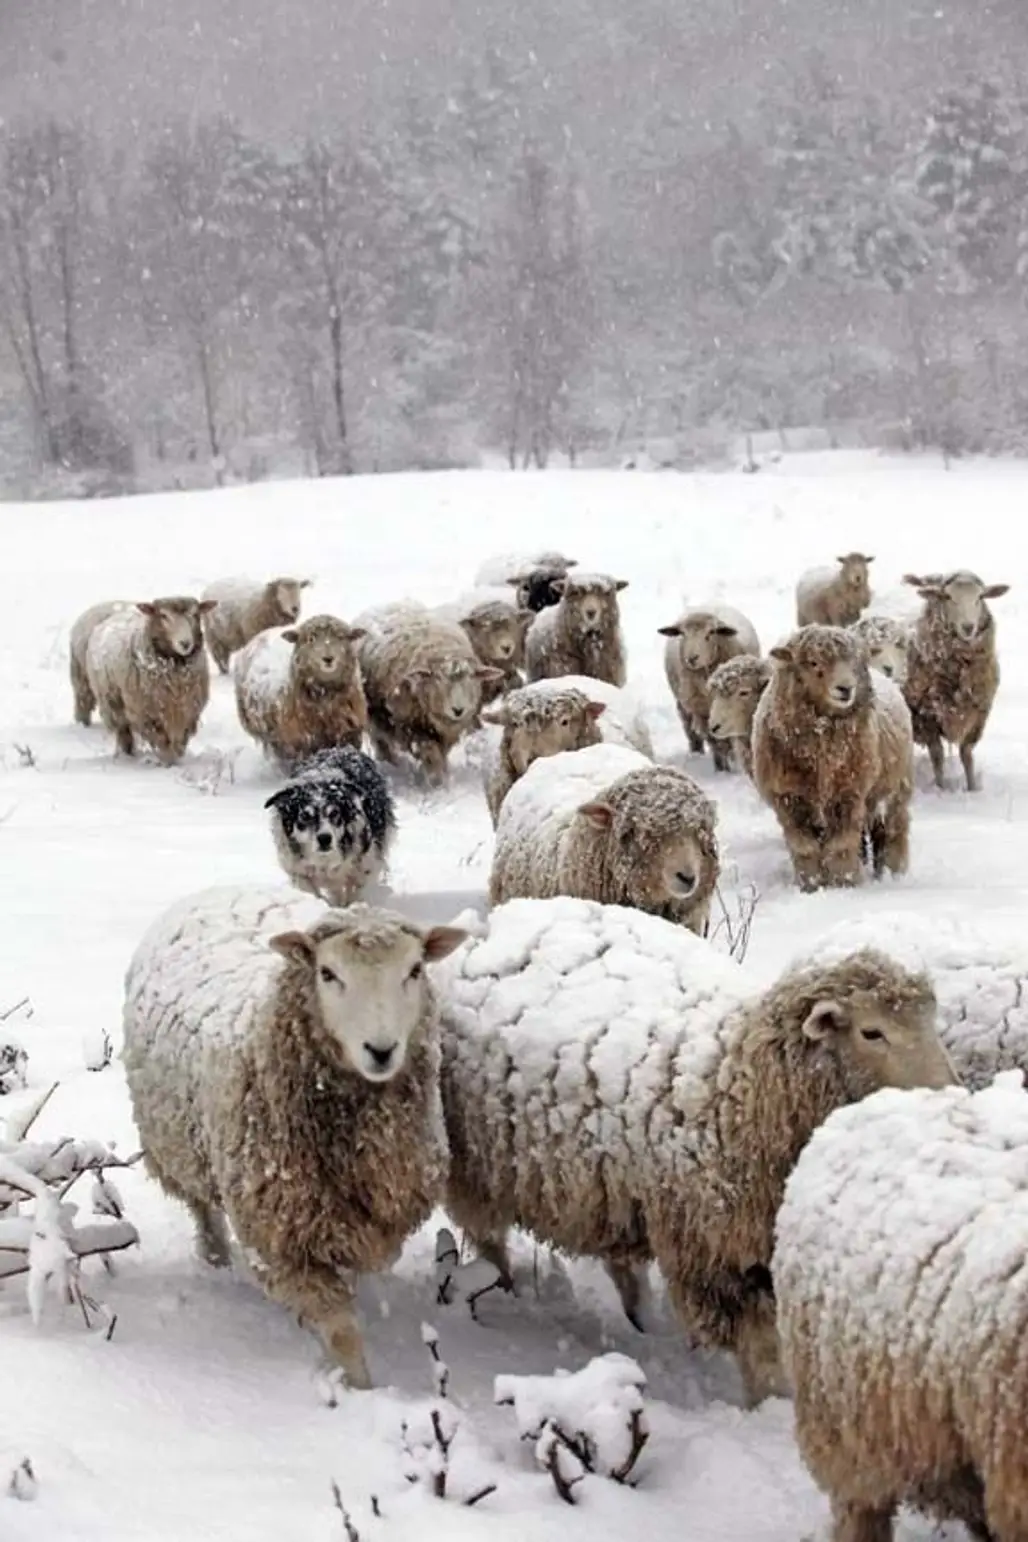 "Good Job We Have These Woolly Jumpers"